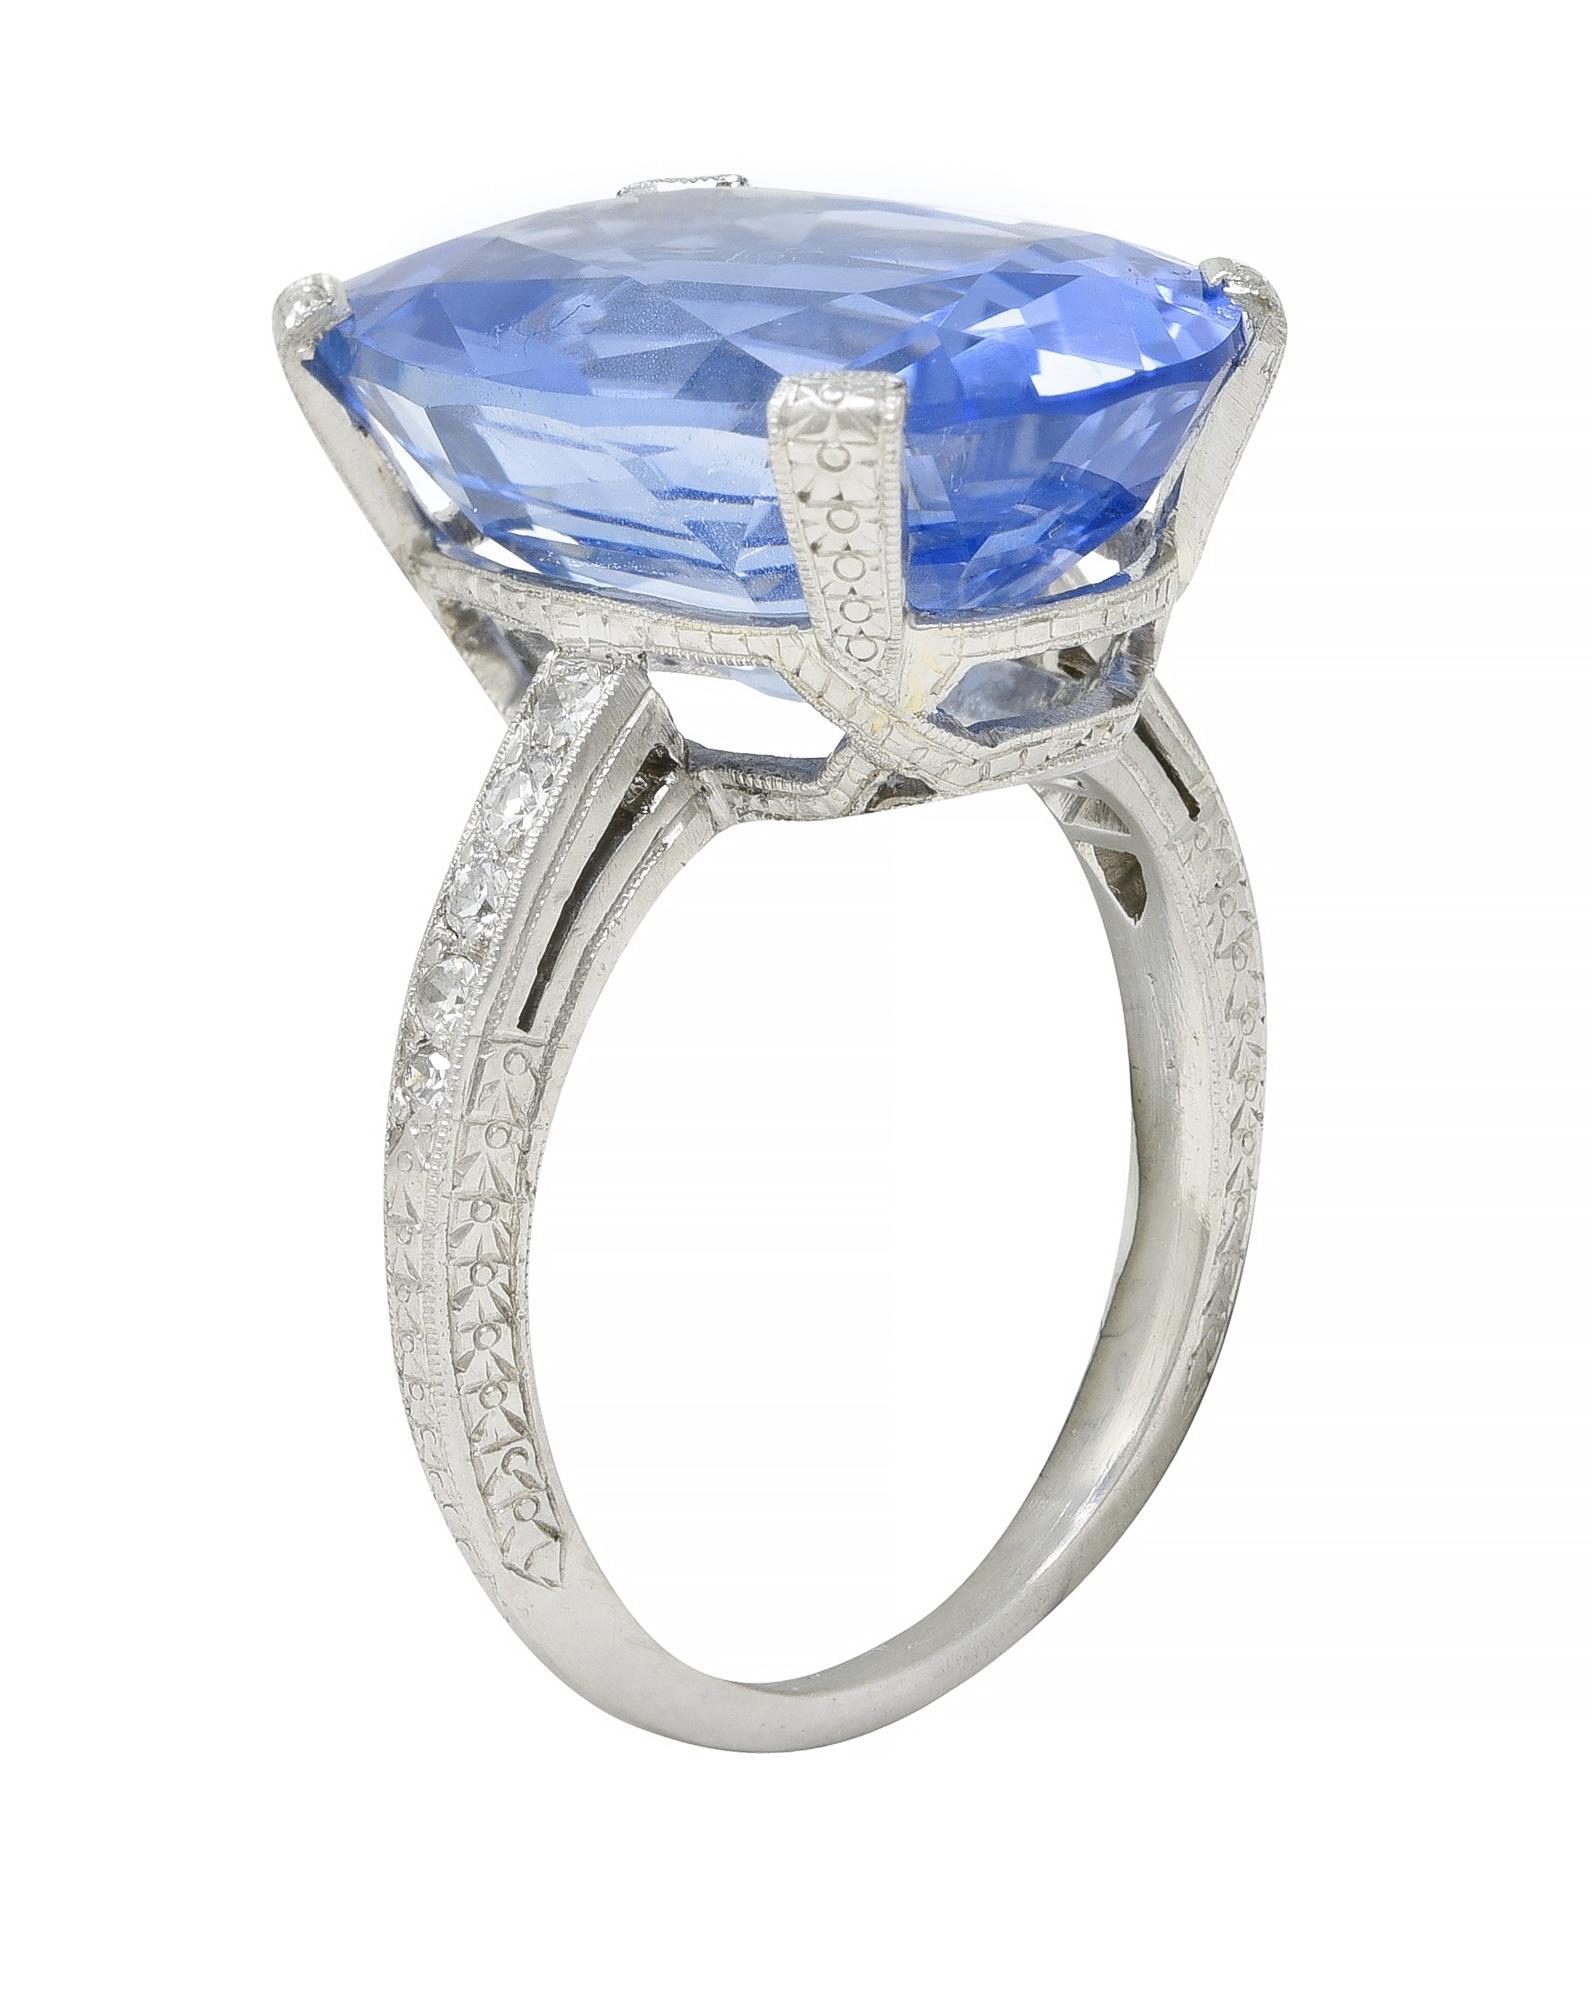 Centering an oval cut sapphire weighing 15.28 carats total - transparent medium blue in color
Natural Sri Lankan in origin with no indications of heat treatment
Prong set in an ornately engraved orange blossom motif basket 
Flanked by cathedral